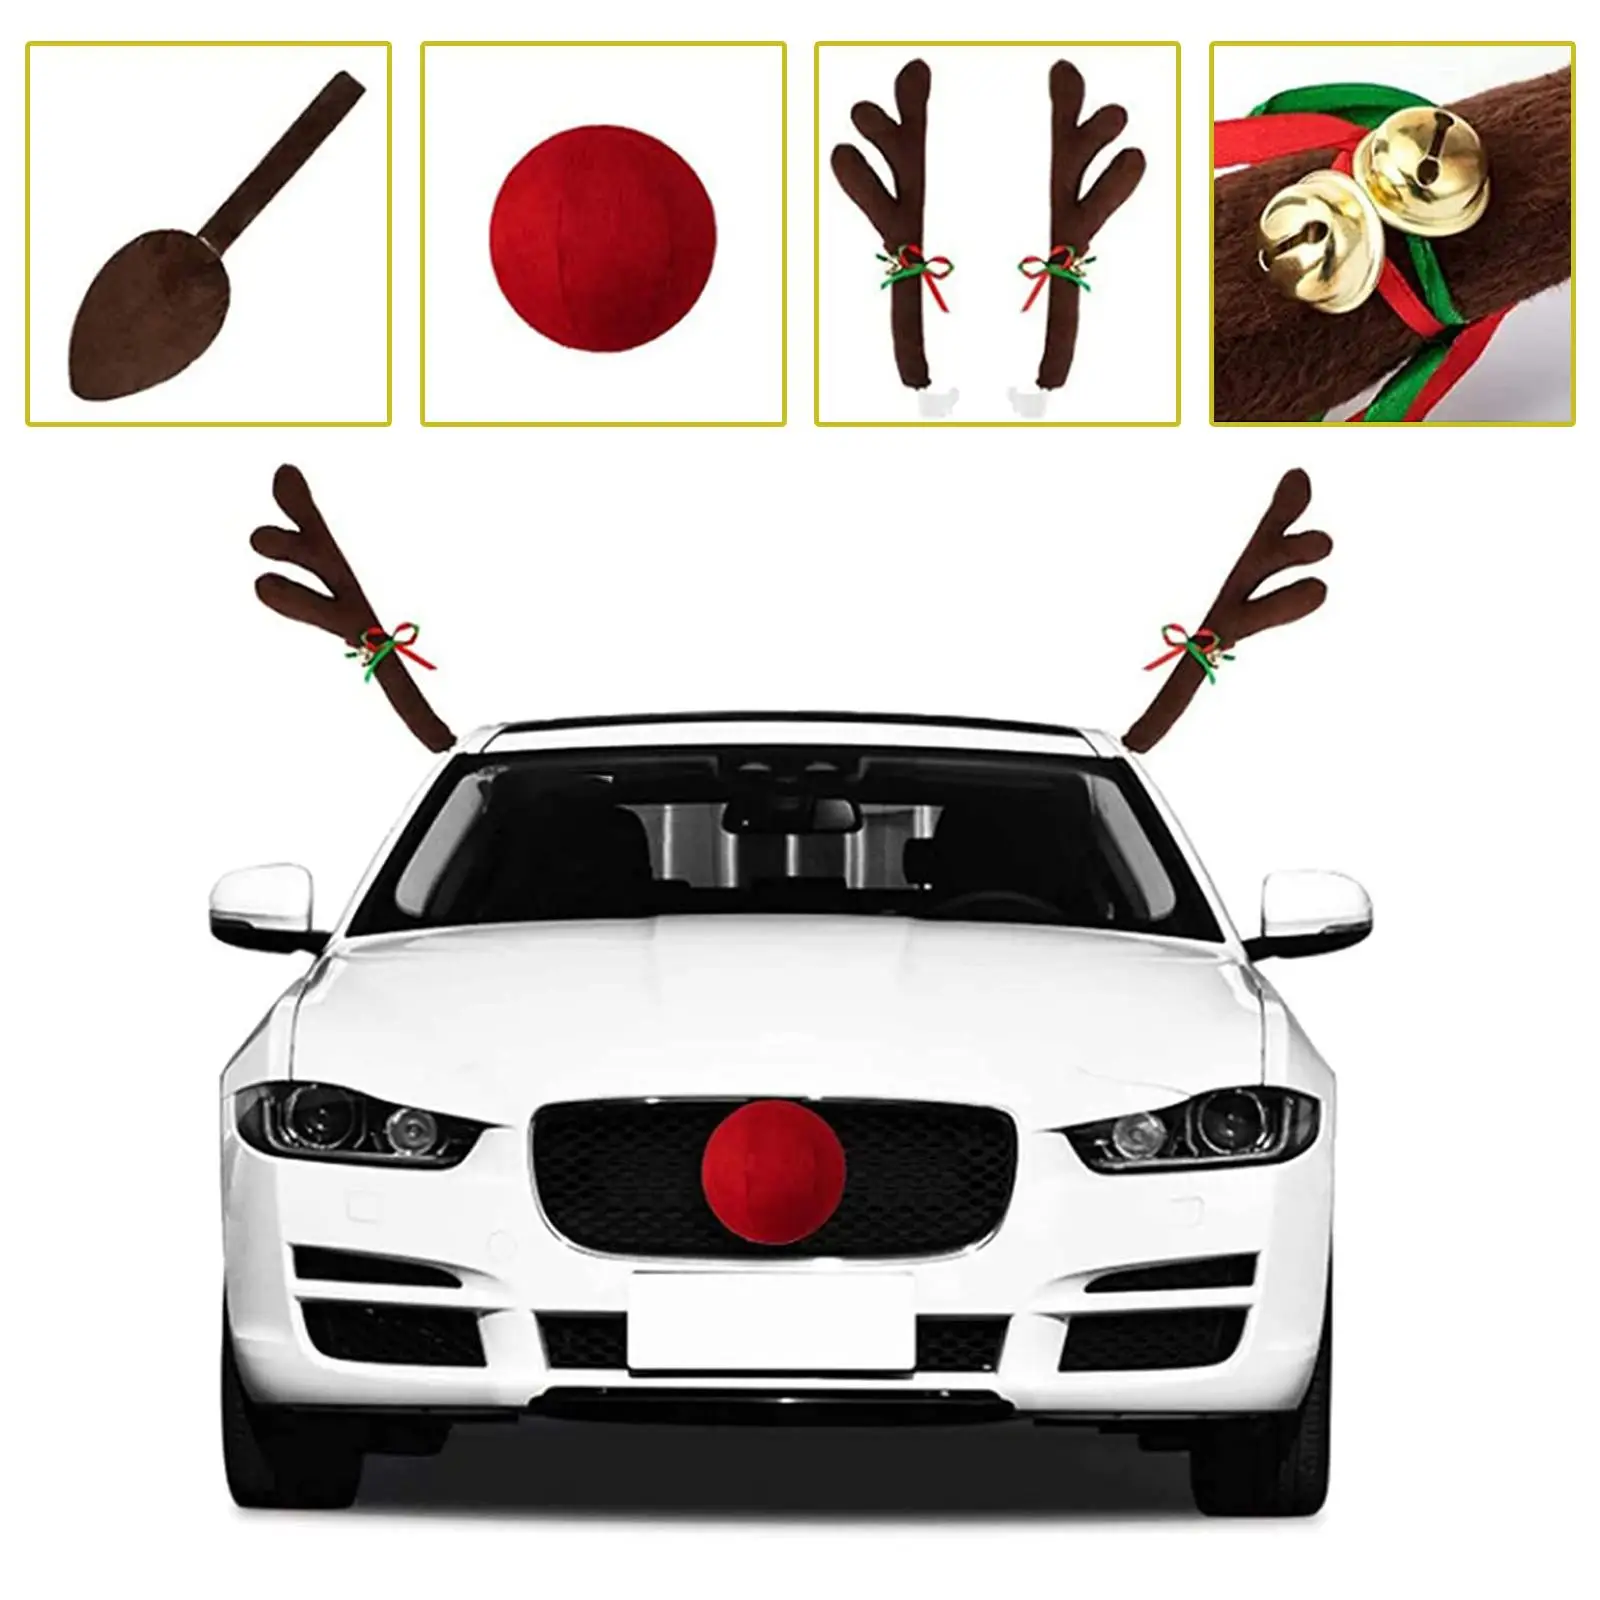 Reindeer Antlers for Car Decoration Car Costume Auto Accessories Easy Installation Winter Holiday for Truck SUV Car Van